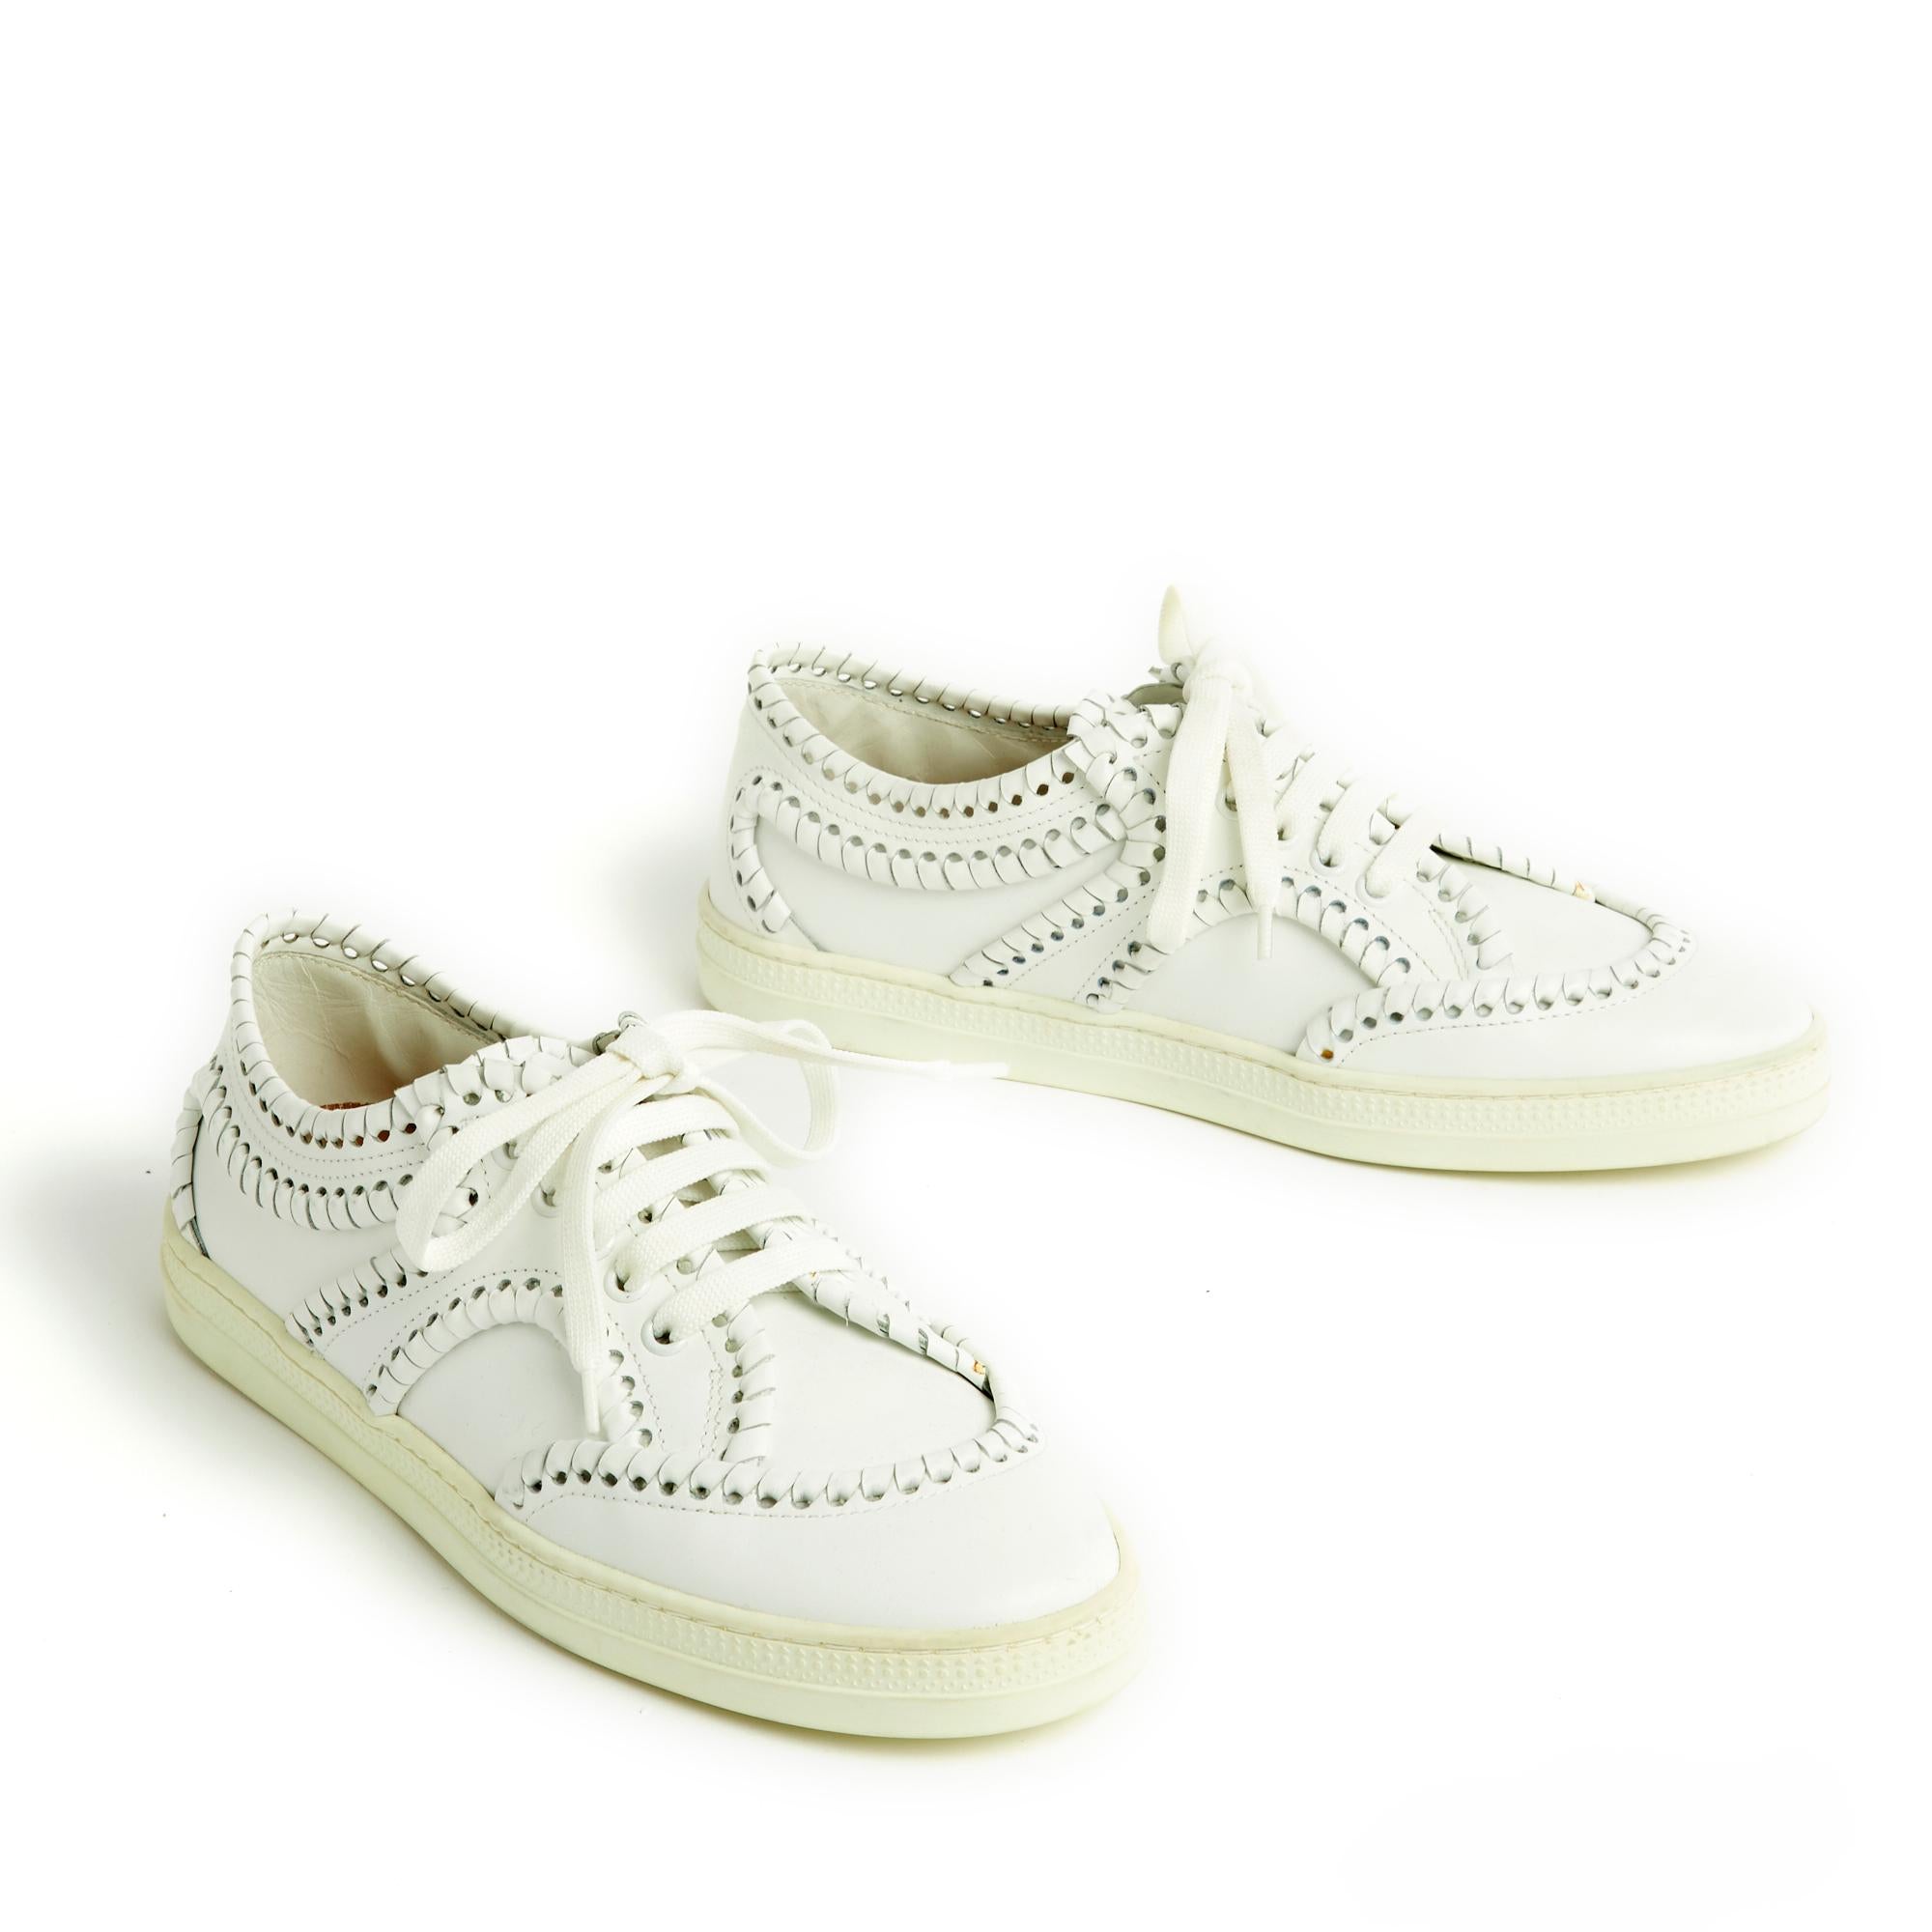 Alaïa sneakers in white leather, edges and inserts interwoven with white leather, 5-hole lace closure. Size EU41 or UK7 US9.5, insole 26.4 cm. The sneakers are perfectly new, delivered in an Alaïa dustbag.